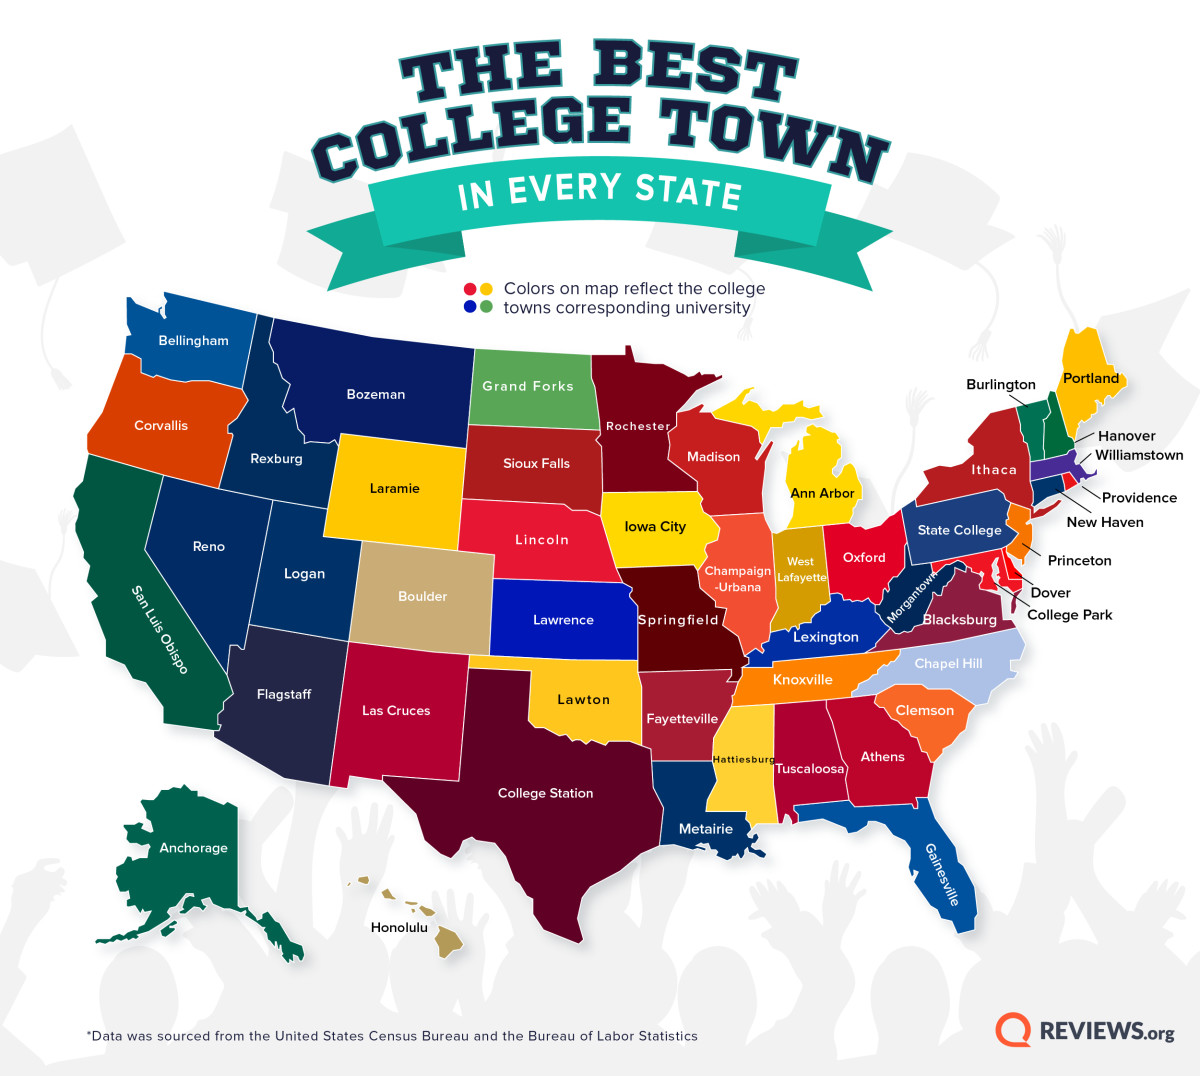 The Best College Town In Minnesota That Would Be Rochester